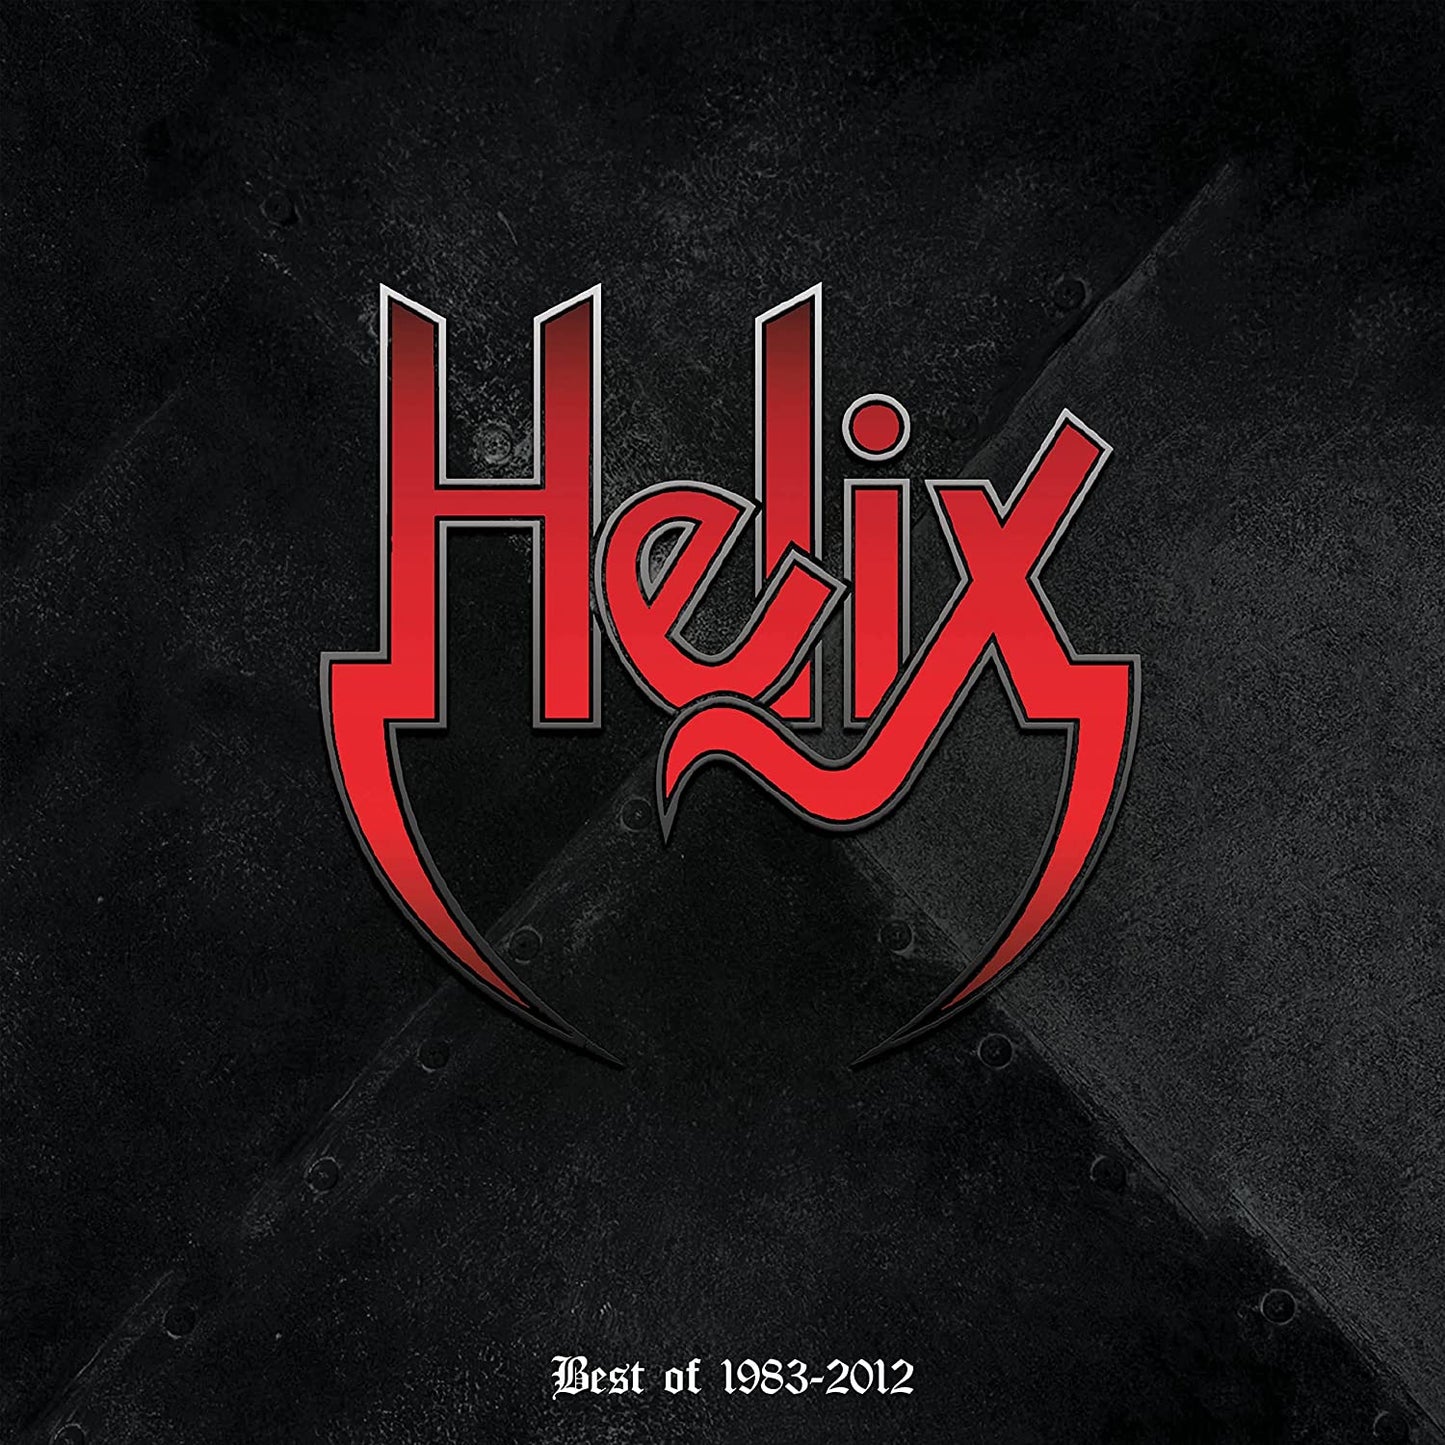 LP - Helix - The Best Of 1983-2012